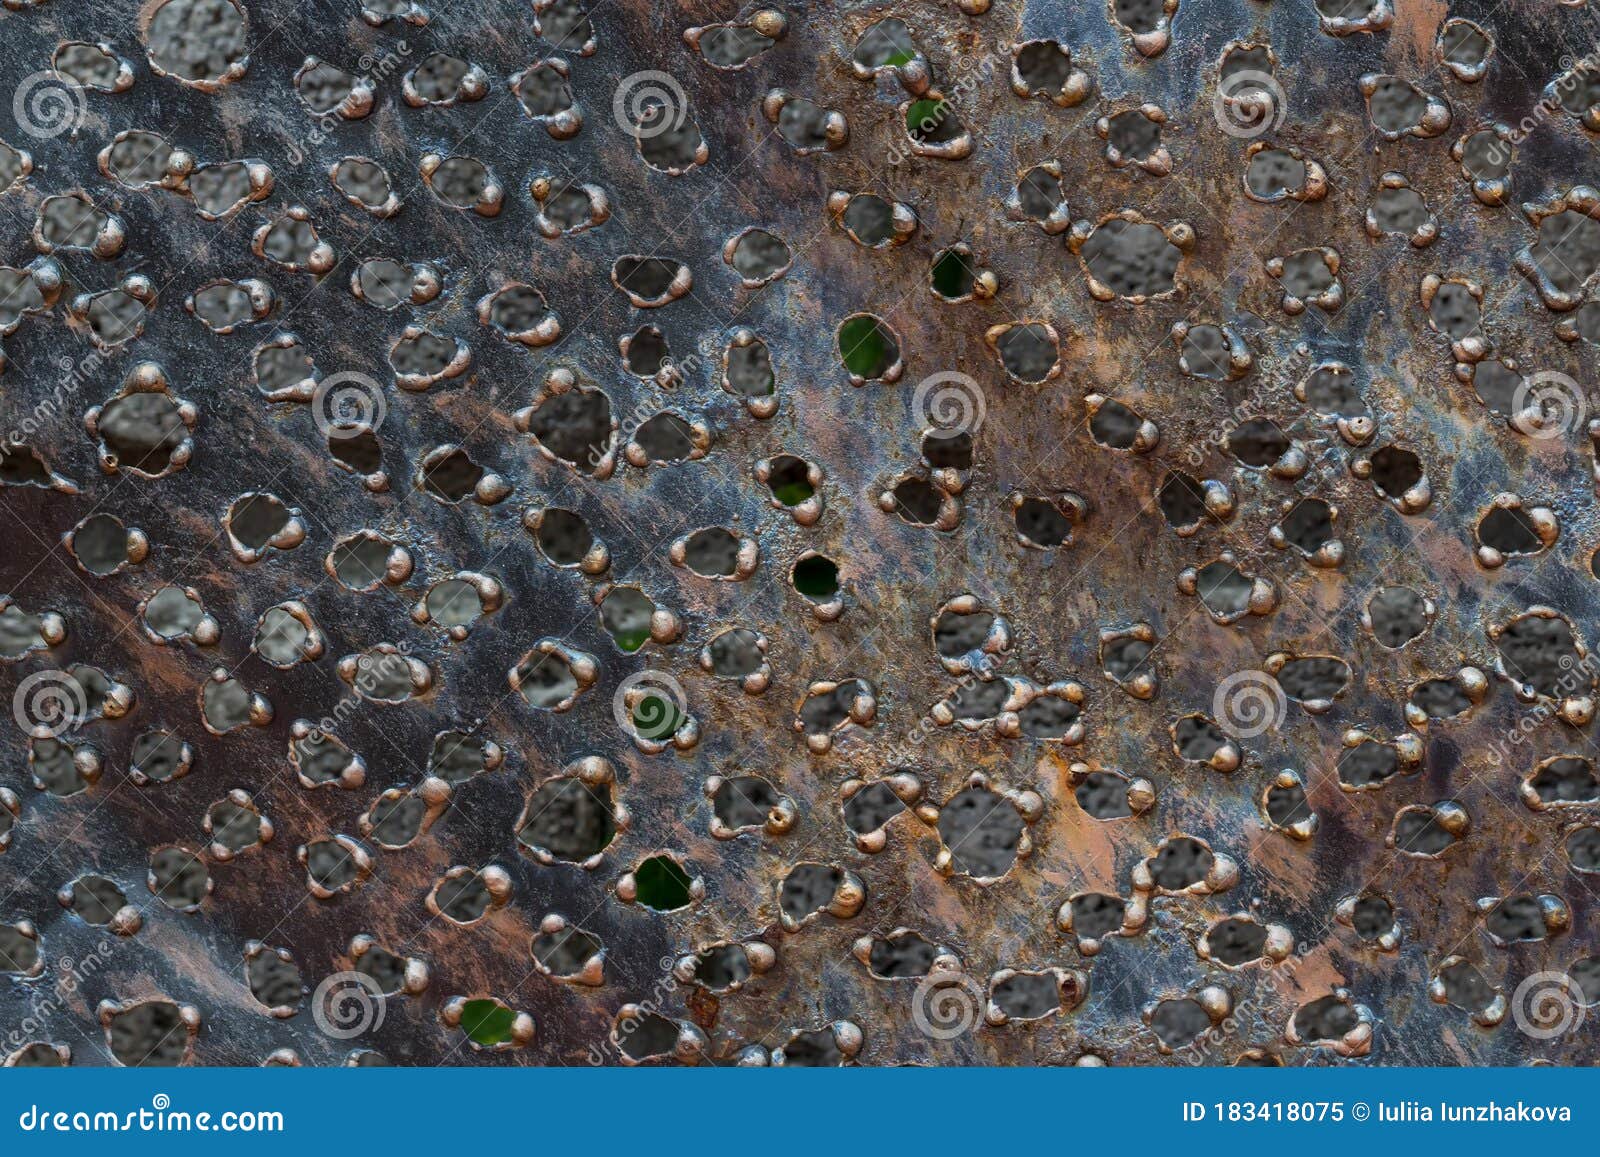 Metal Texture Background With Holes On The Surface Stock Image - Image